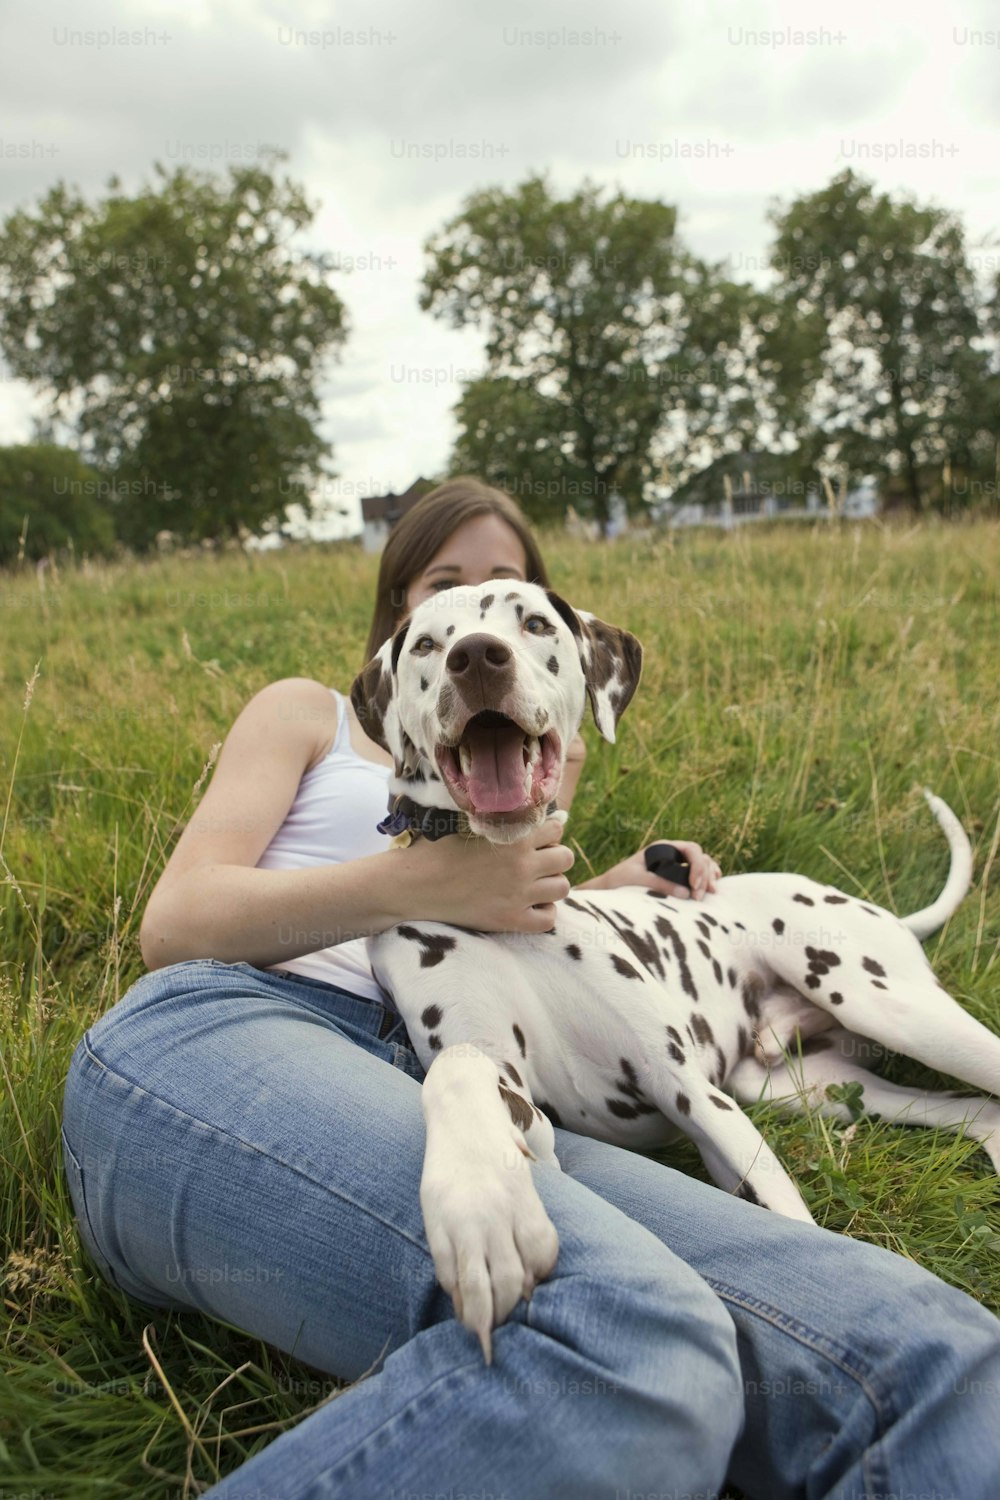 a woman sitting in the grass with a dalmatian dog